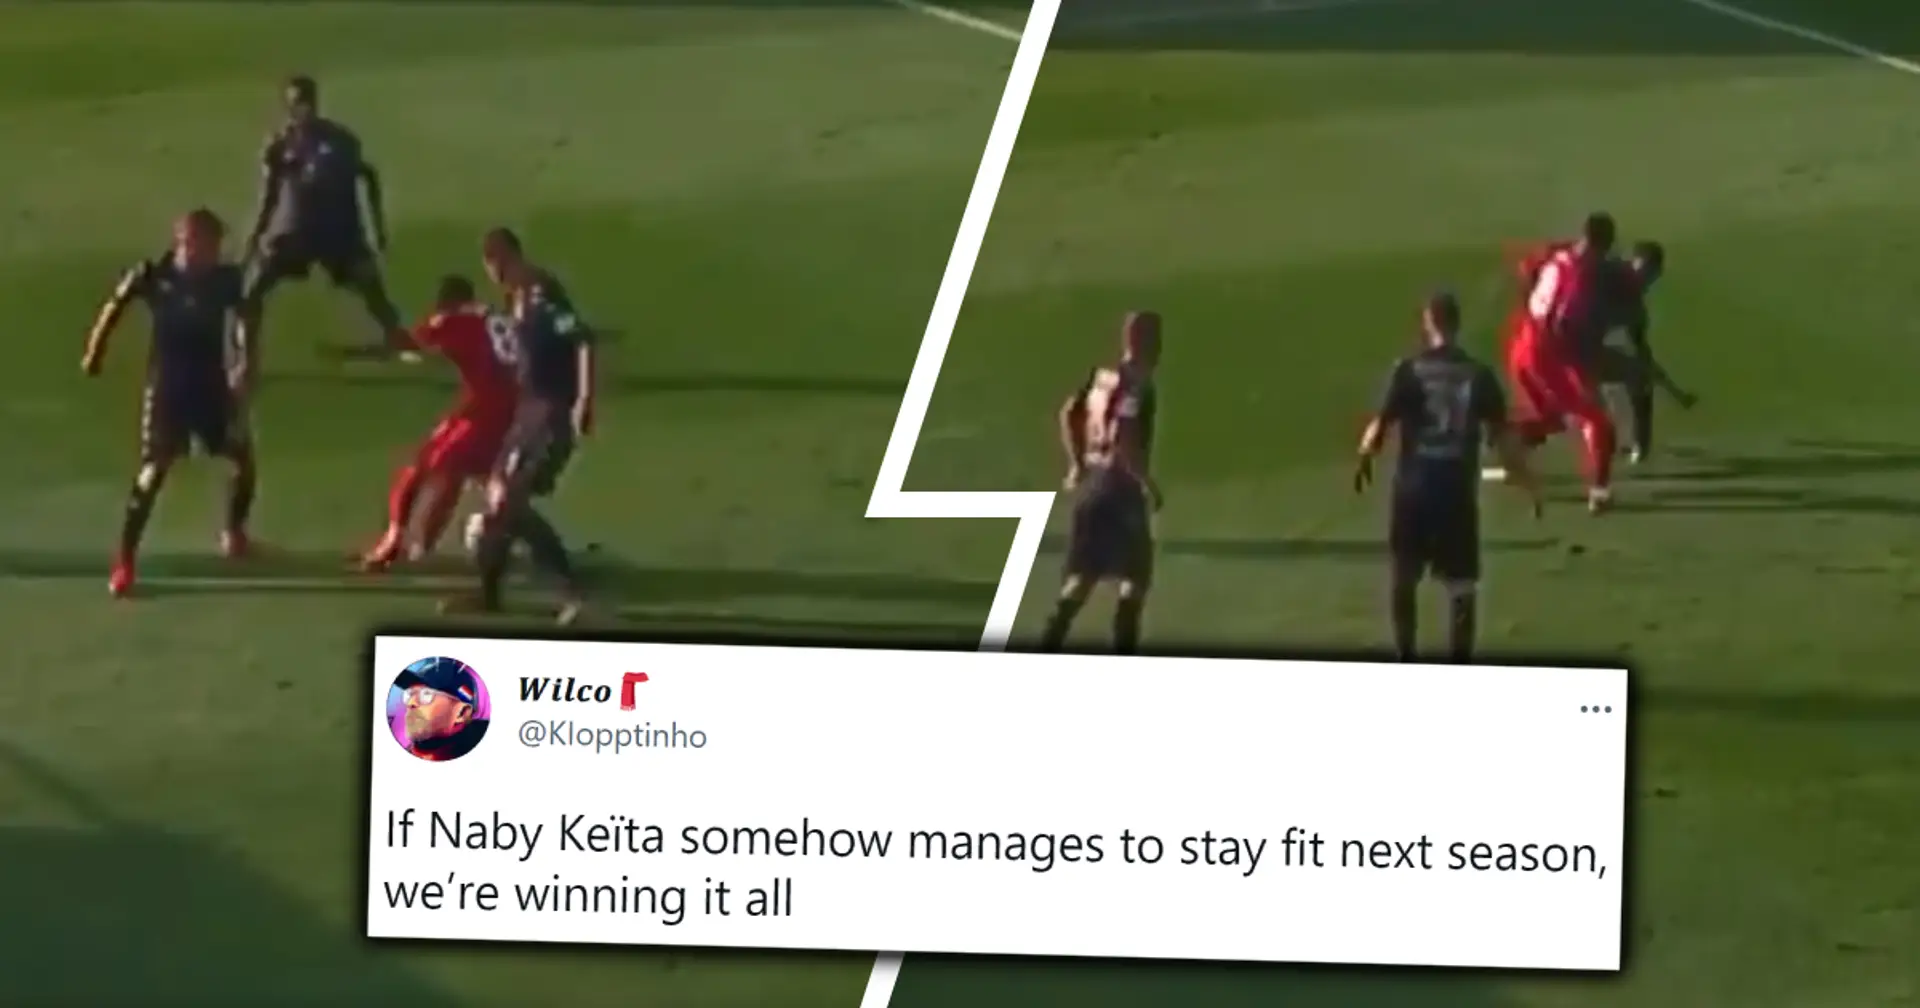 Proper tekkers: Naby Keita beats 3 players with incredible skill including slick nutmeg, fans react